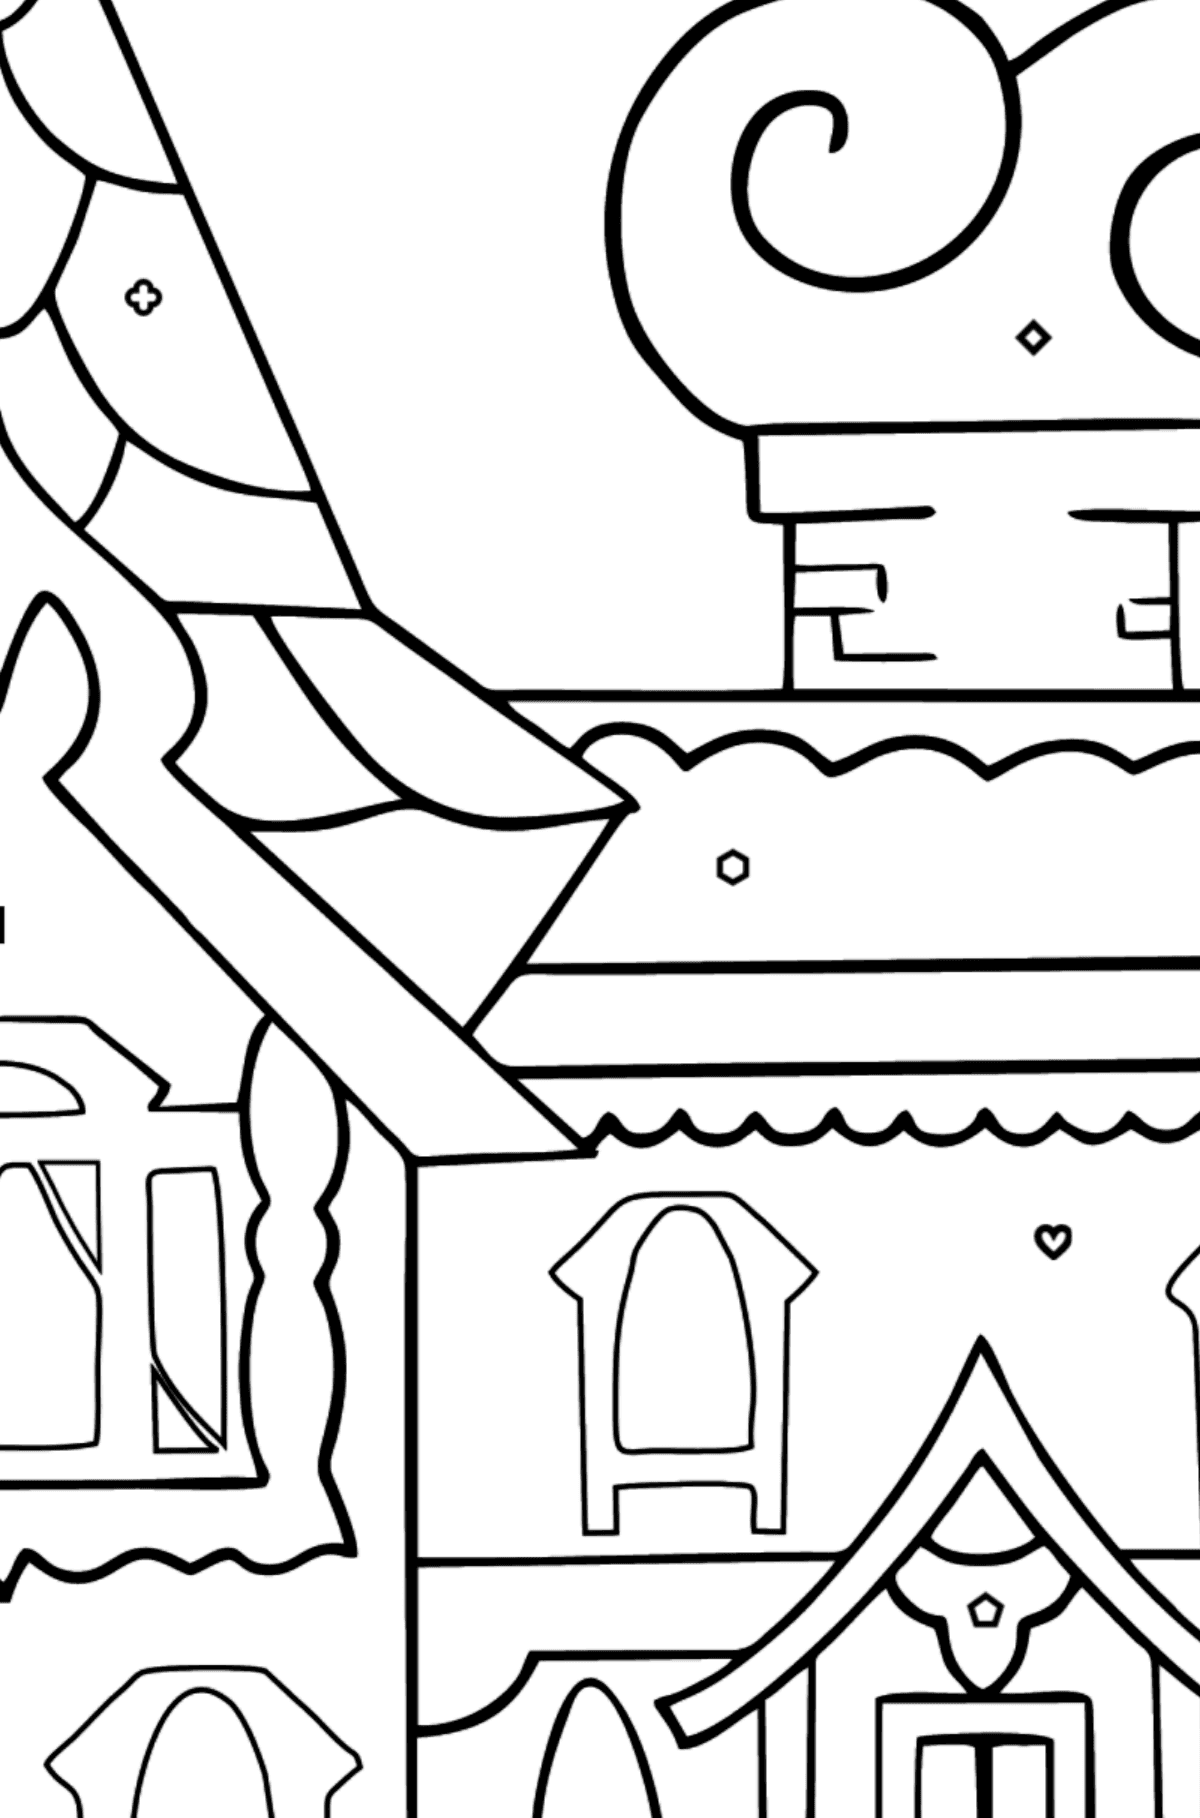 Simple Coloring Page - A House - A Kingdom of Storytellers - Coloring by Symbols and Geometric Shapes for Kids